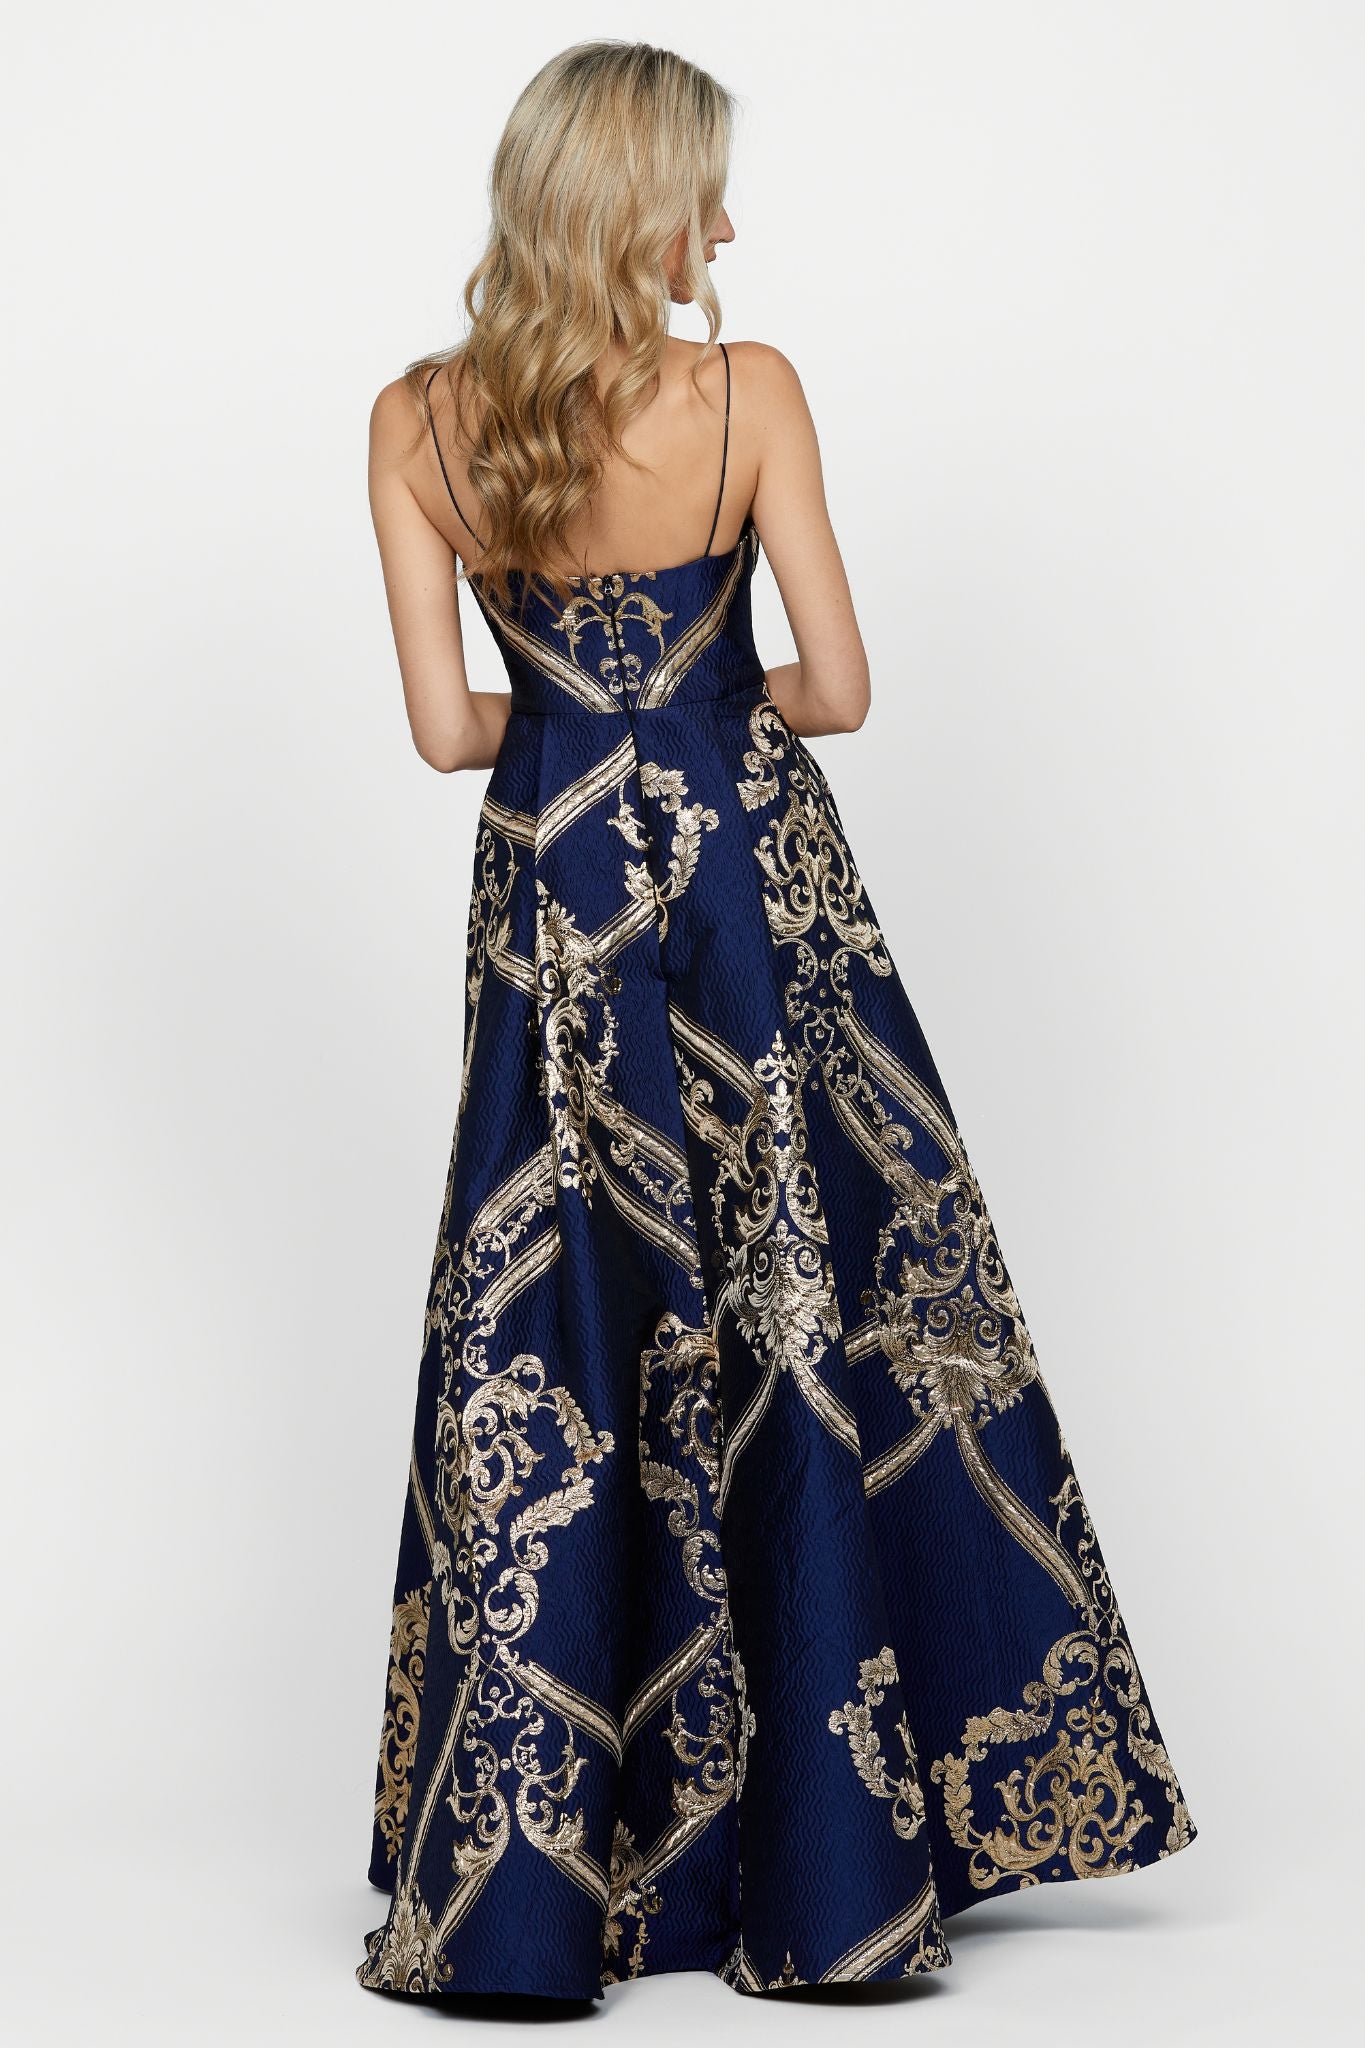 Edwina Jacquard Gown by Bariano - RENTAL